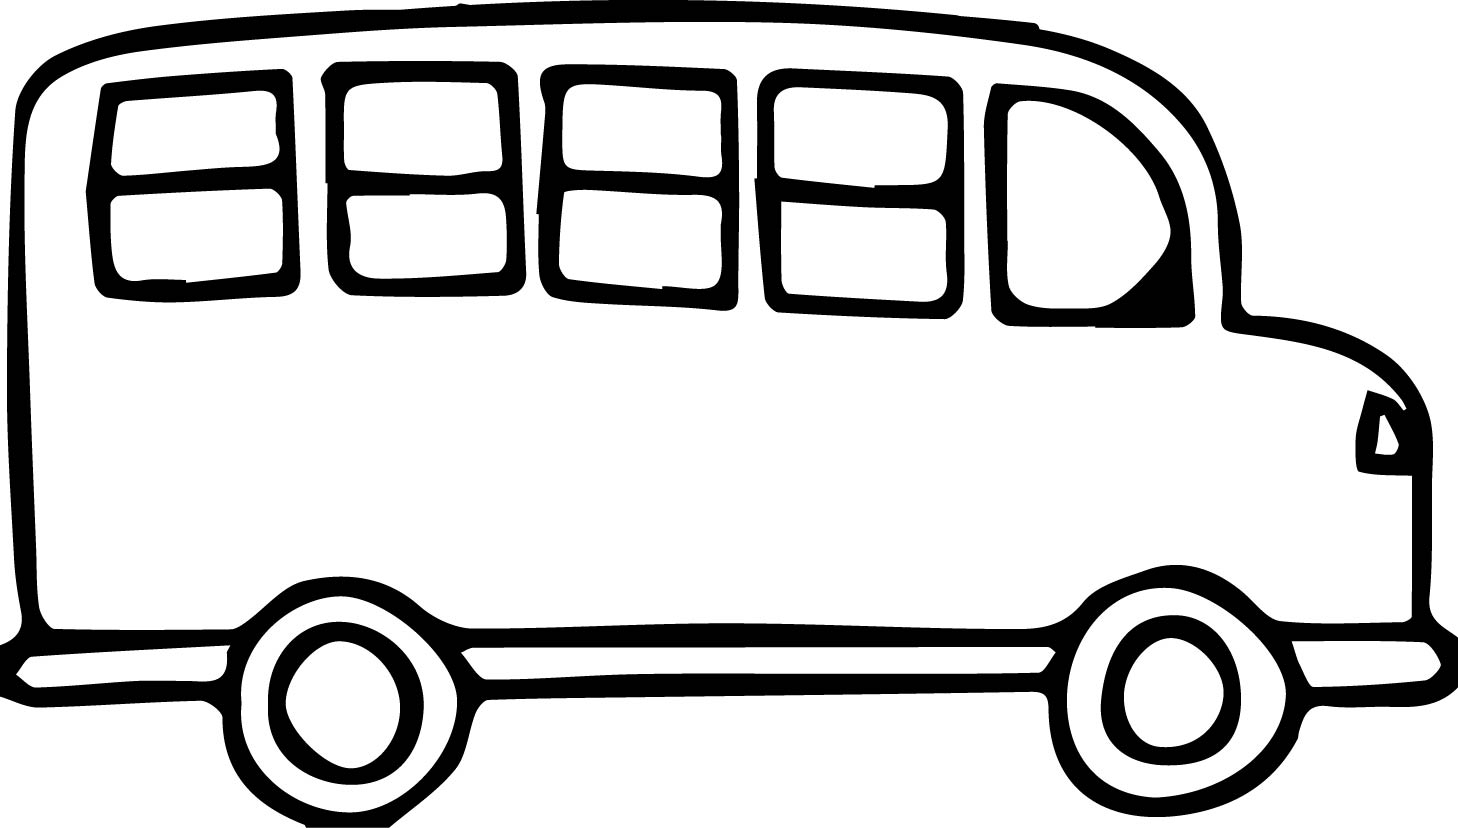 Bus clipart black and white Inspirational Van Clipart Black